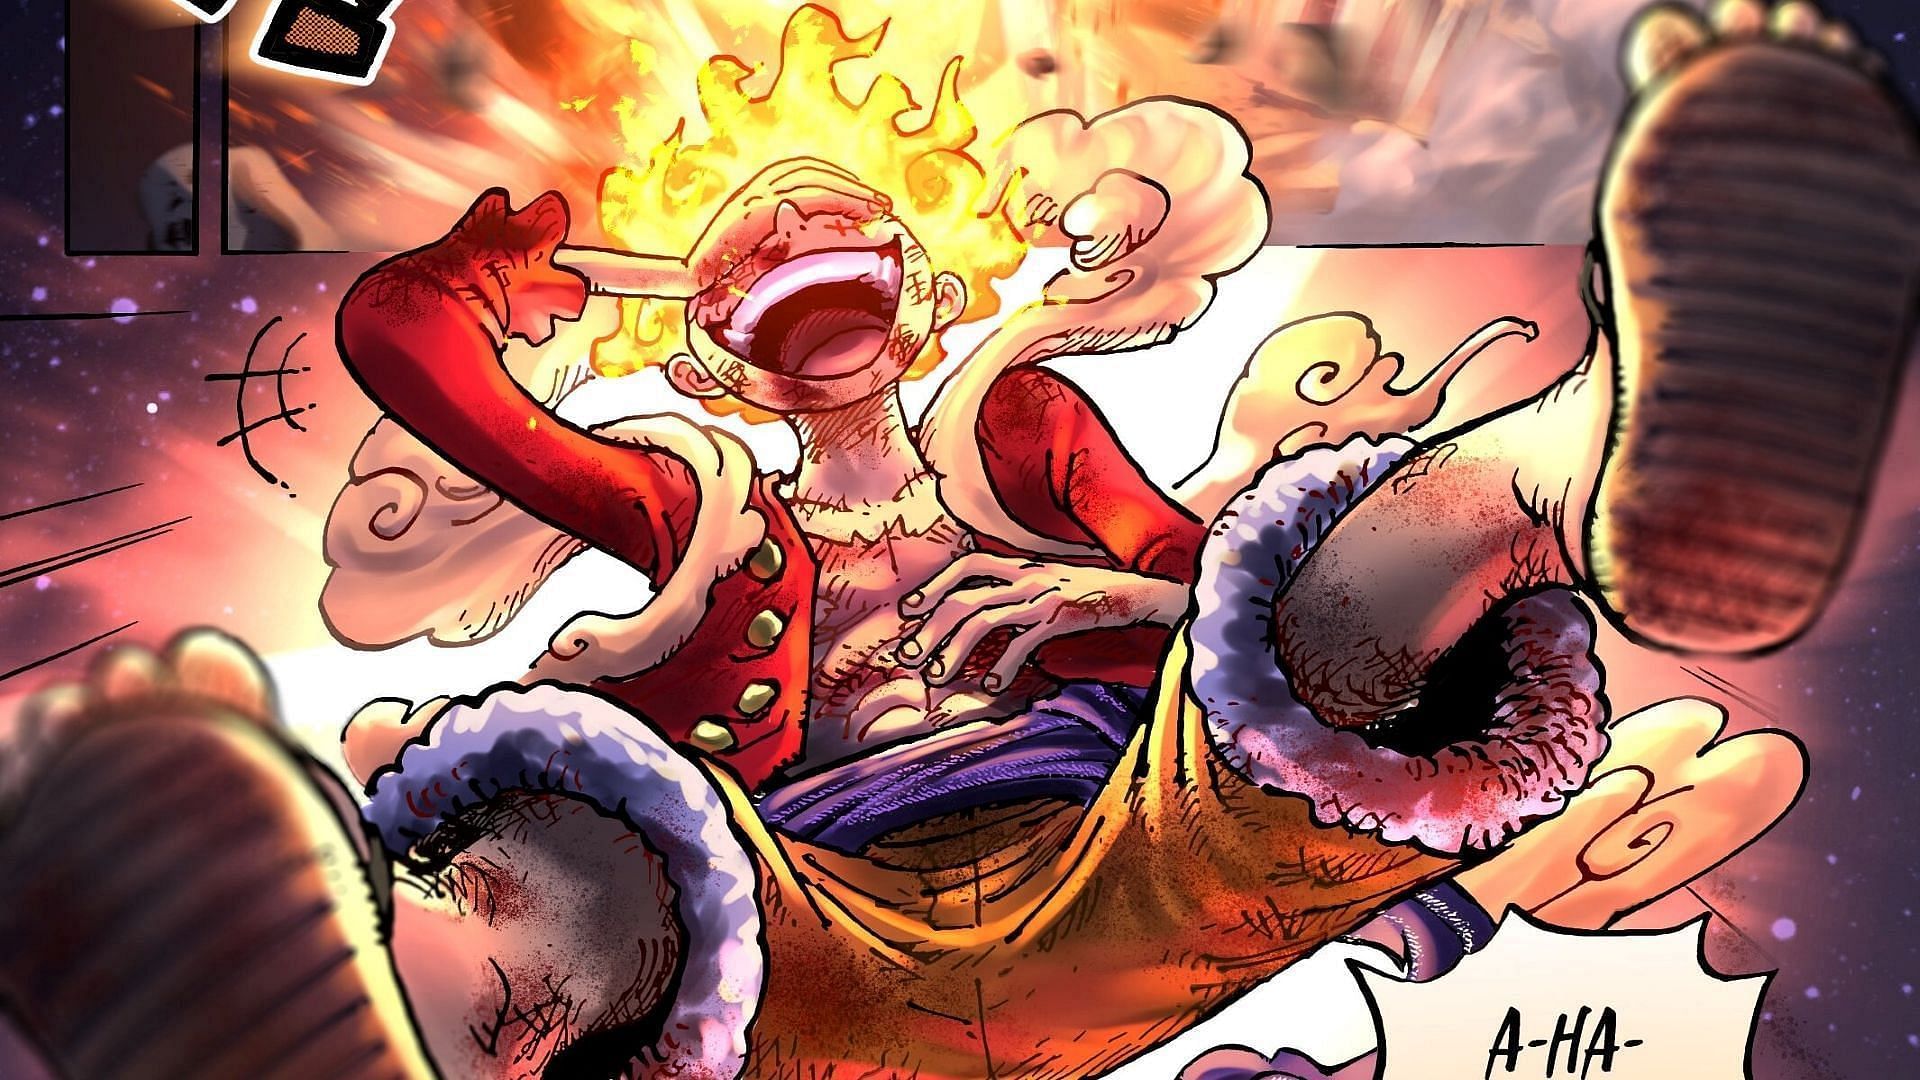 ONE PIECE SPOILERS on X: #ONEPIECE The animation for GEAR 5 Luffy will be  insane.  / X